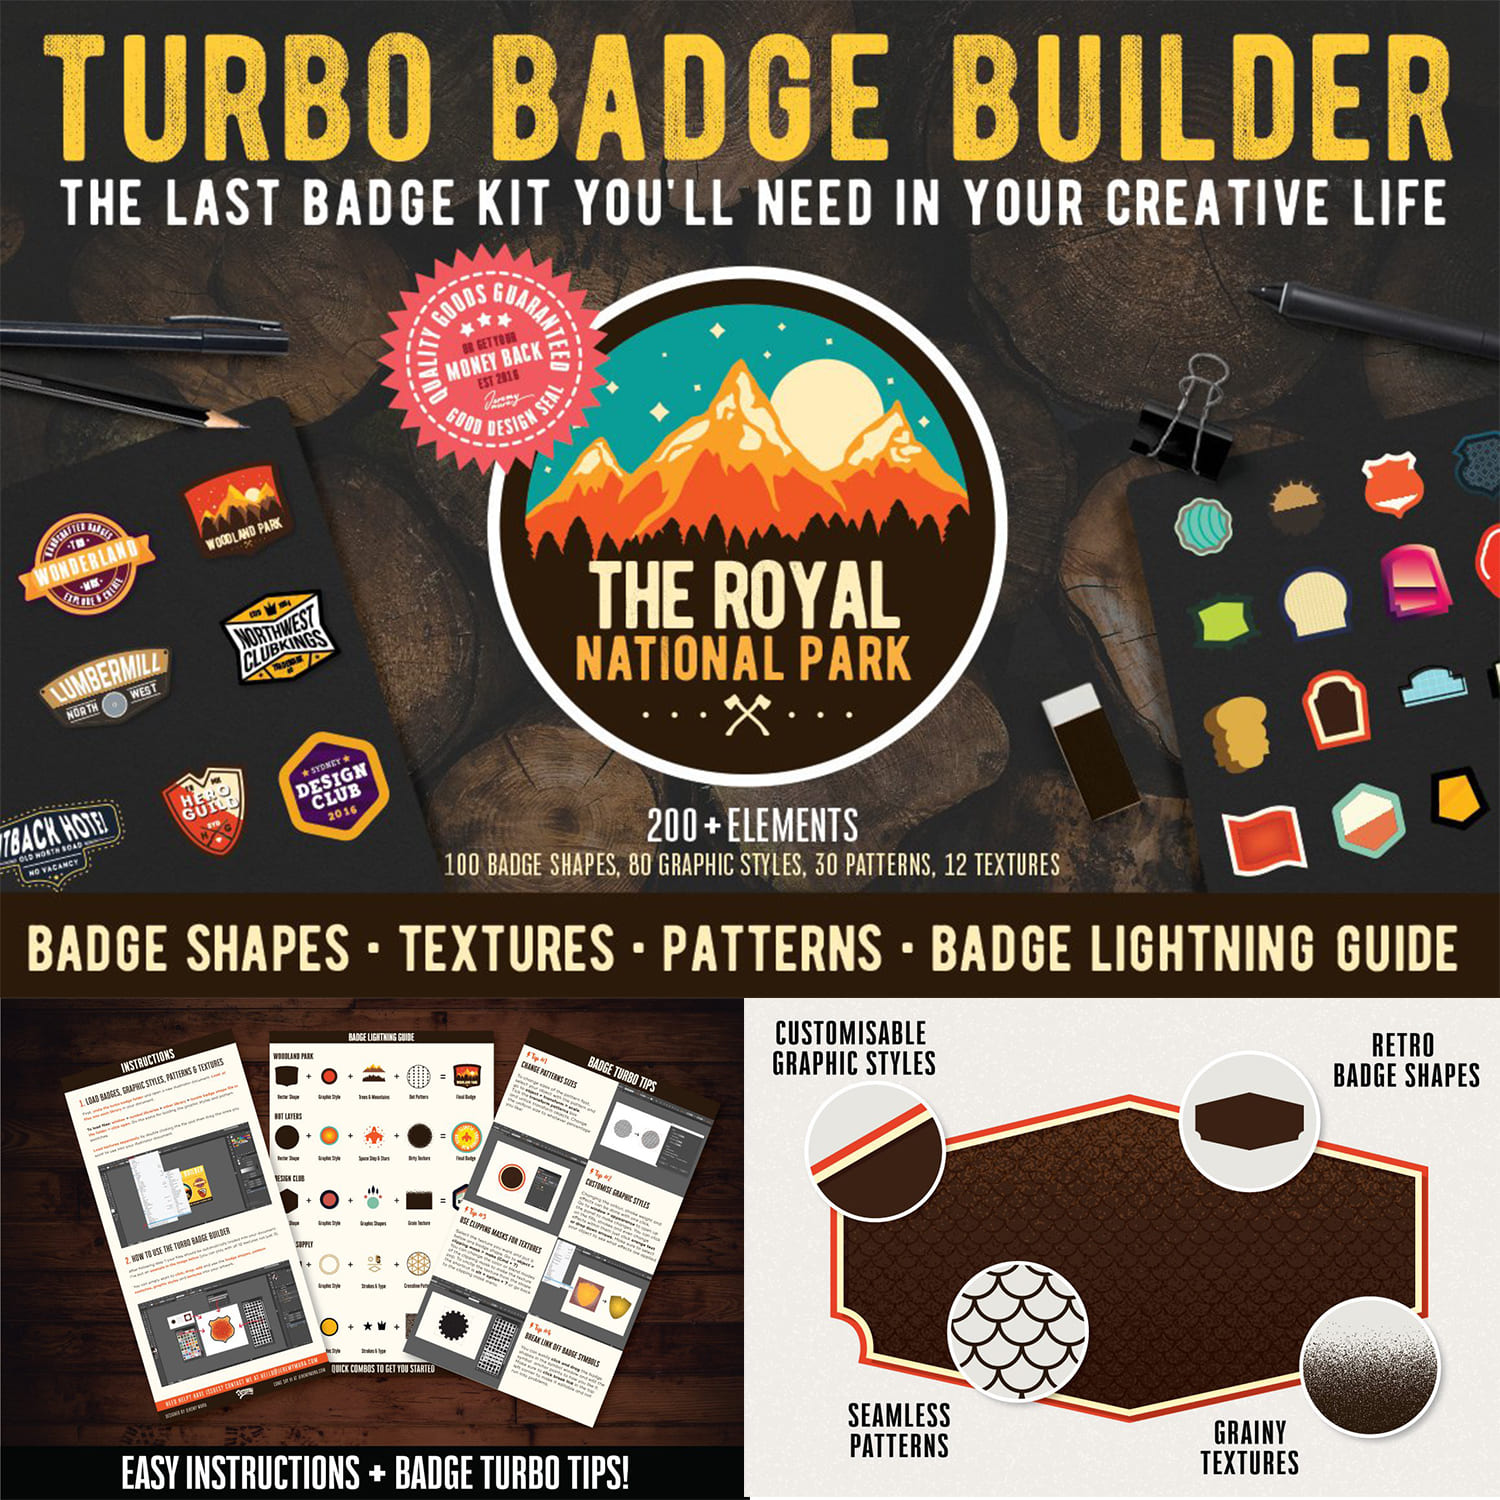 Turbo Badge Builder cover image.